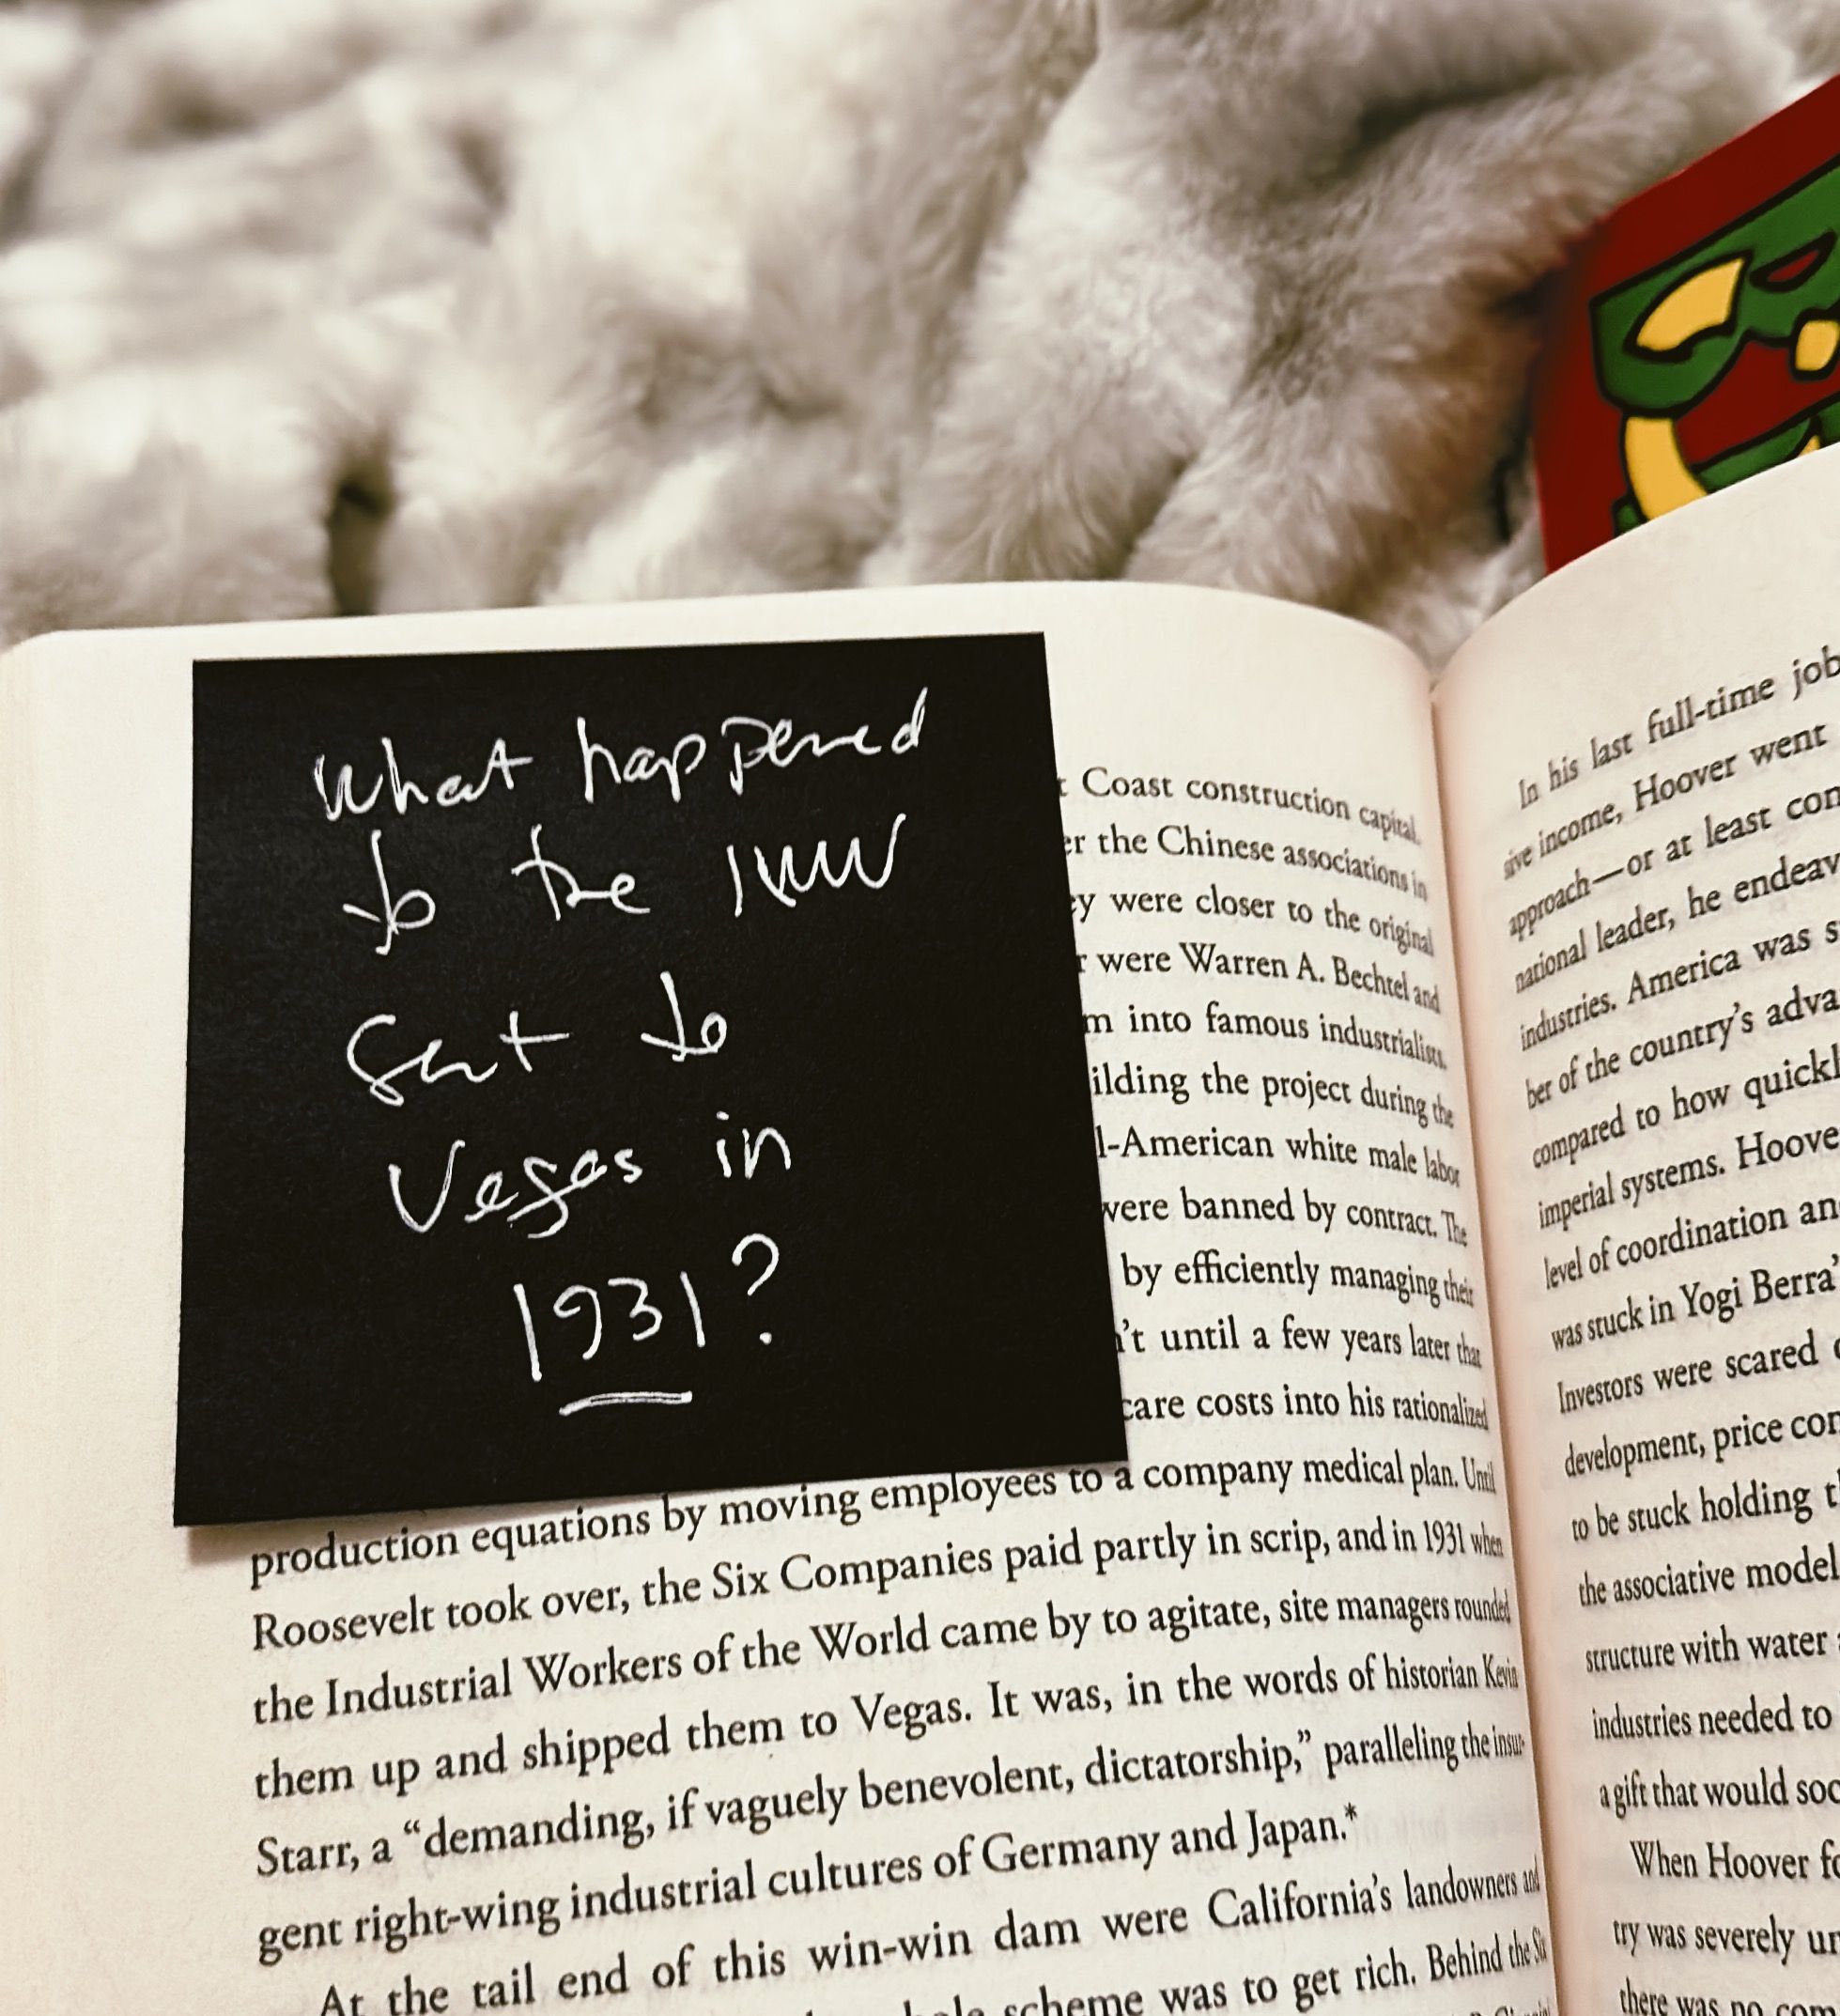 image of the book PALO ALTO on a fluffy white faux fur blanket, with a black post-it note on the page reading, "What happened to the IWW sent to Vegas in 1931?"